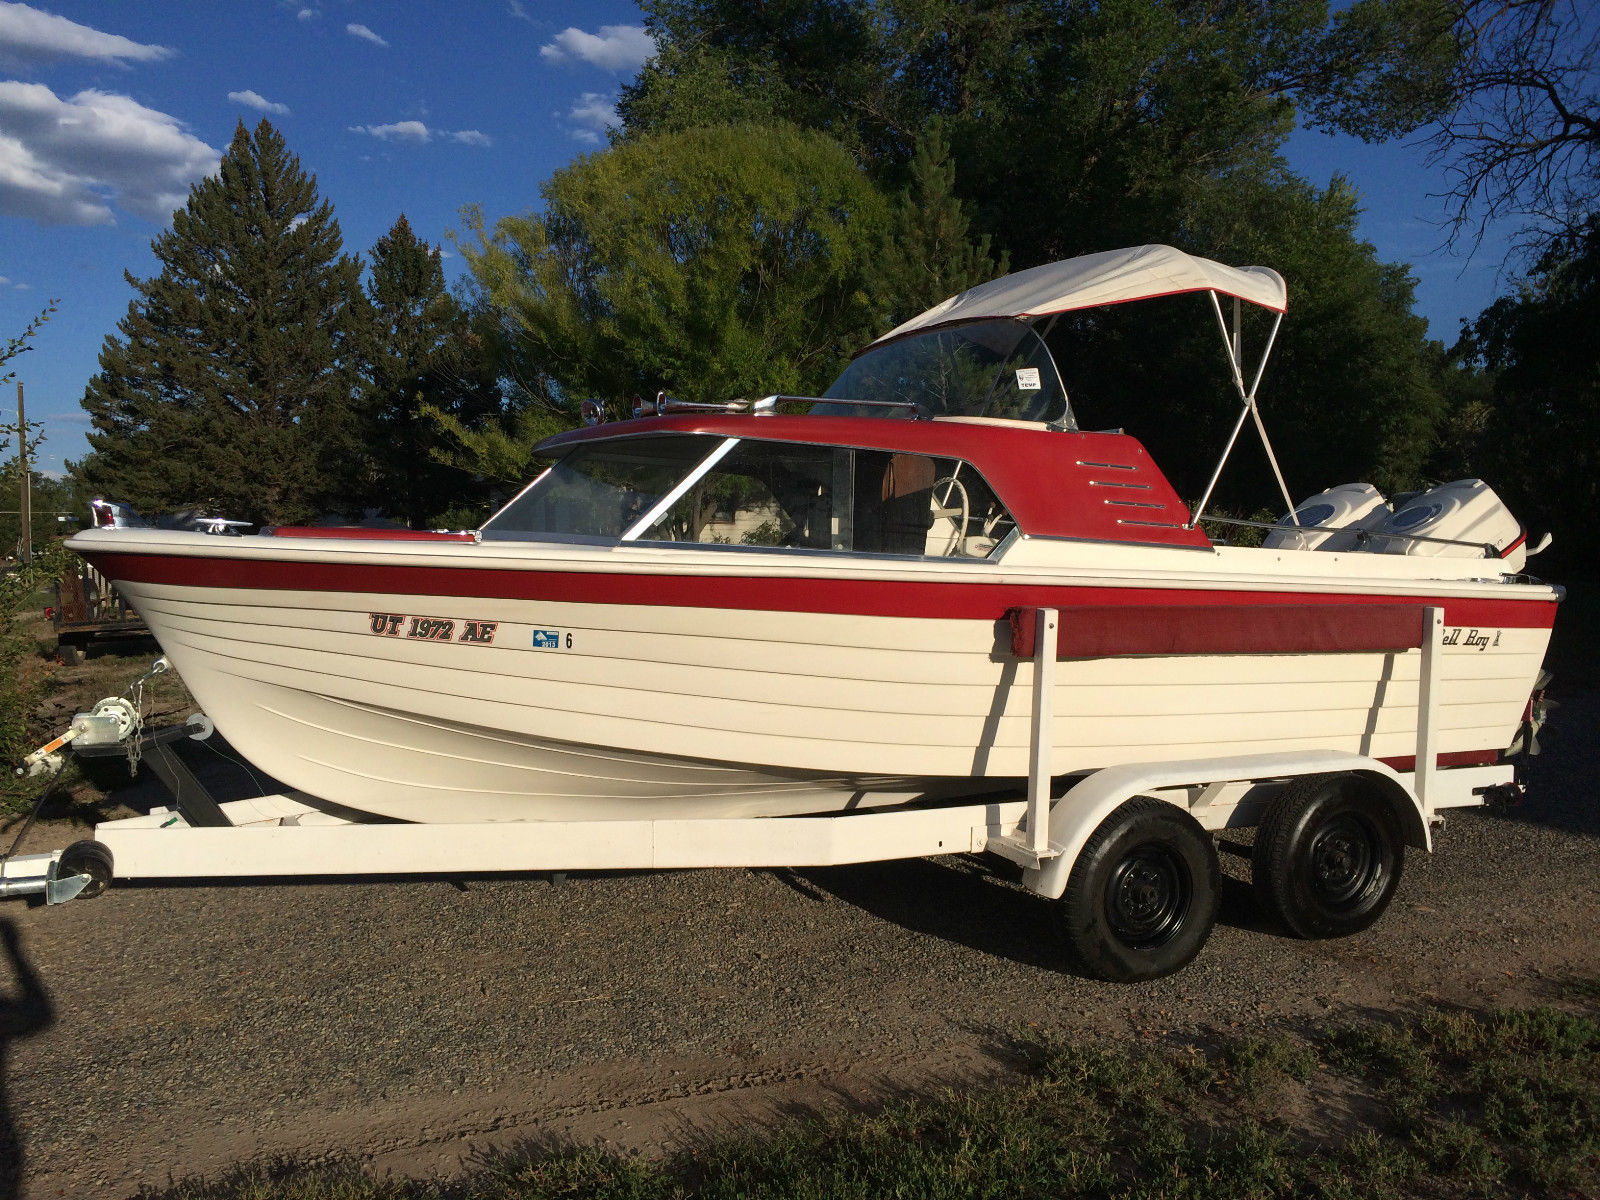 Bell Boy Cabin Cruiser 1966 for sale for $5,300 - Boats ...